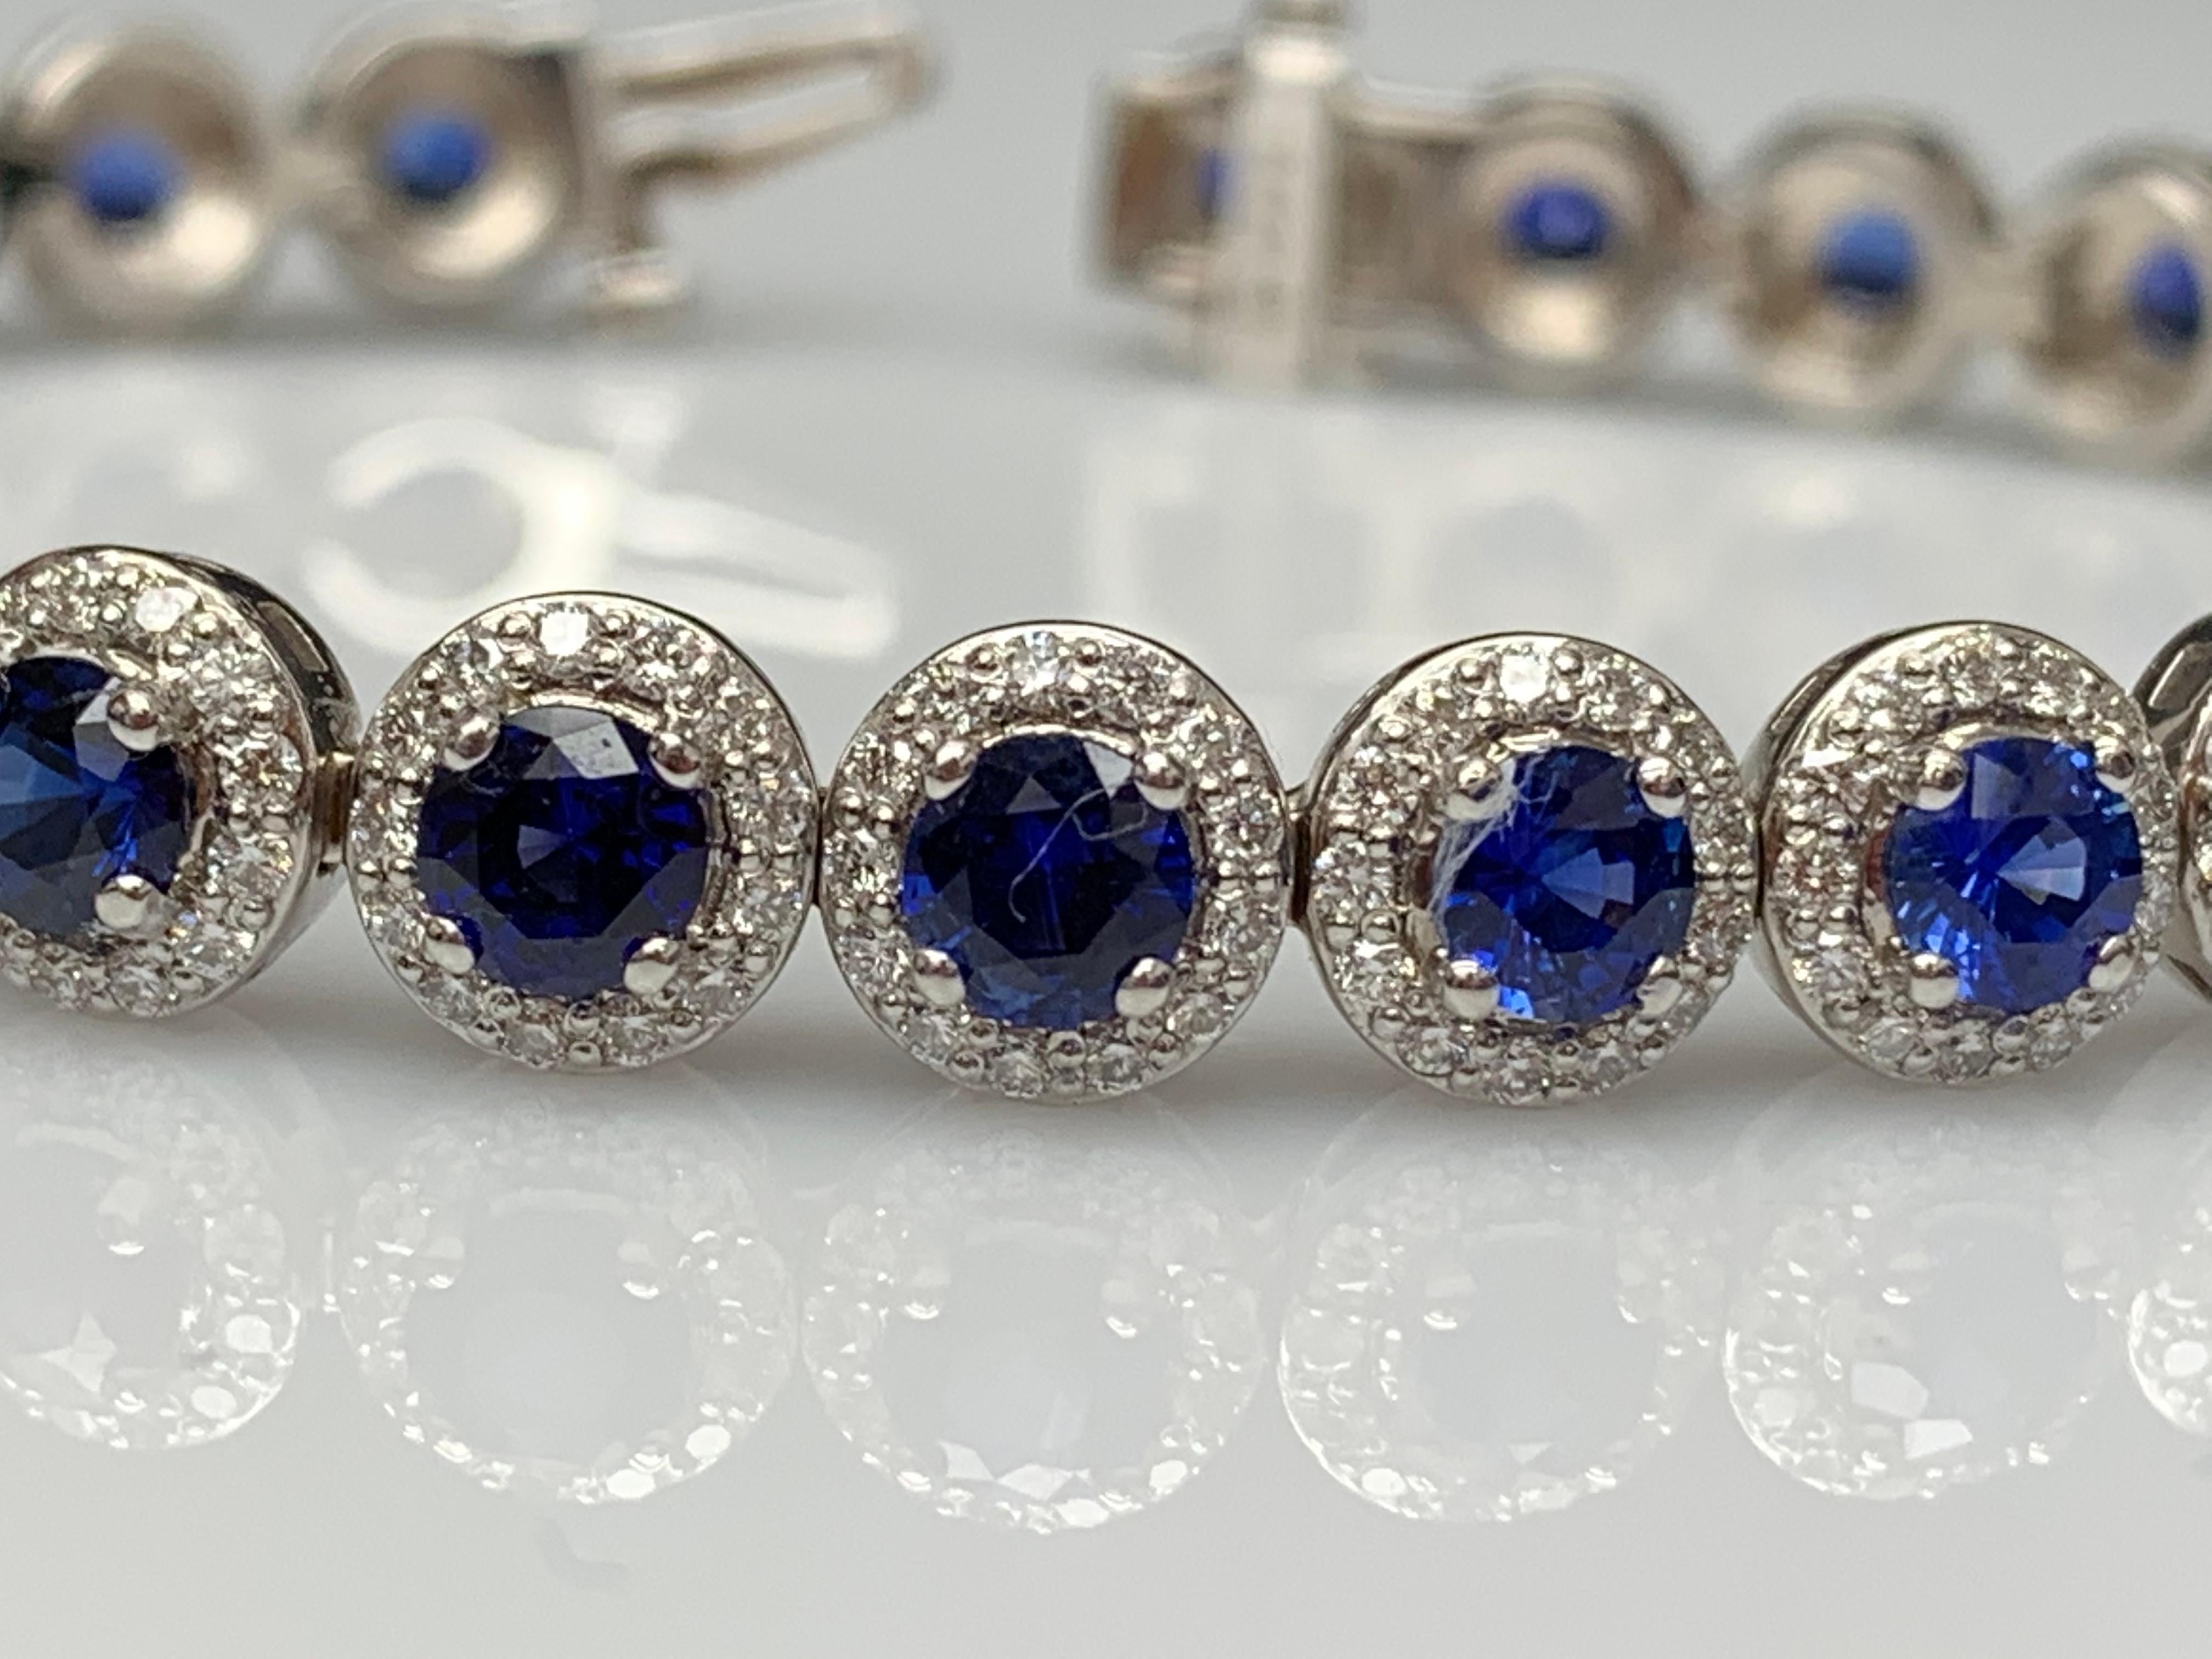 7.47 Carat Blue Sapphire and Diamond Halo Tennis Bracelet in 14k White Gold For Sale 5